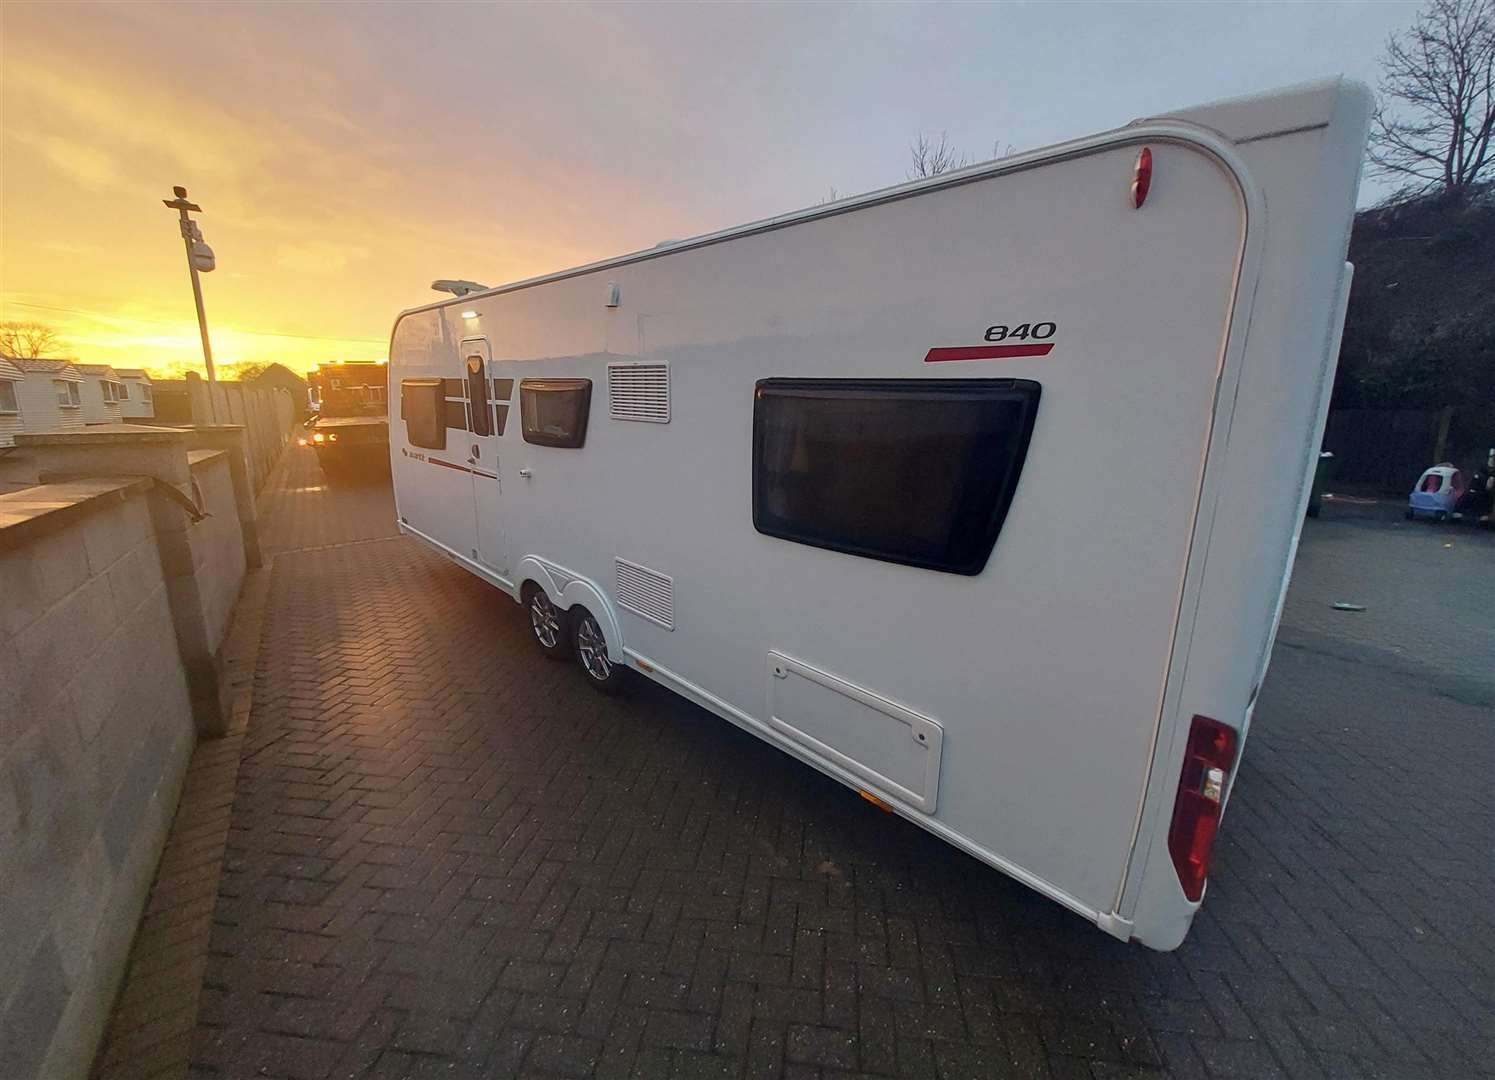 The caravan was stolen from Cheshire and found in Dartford. Photo credit: Kent Police